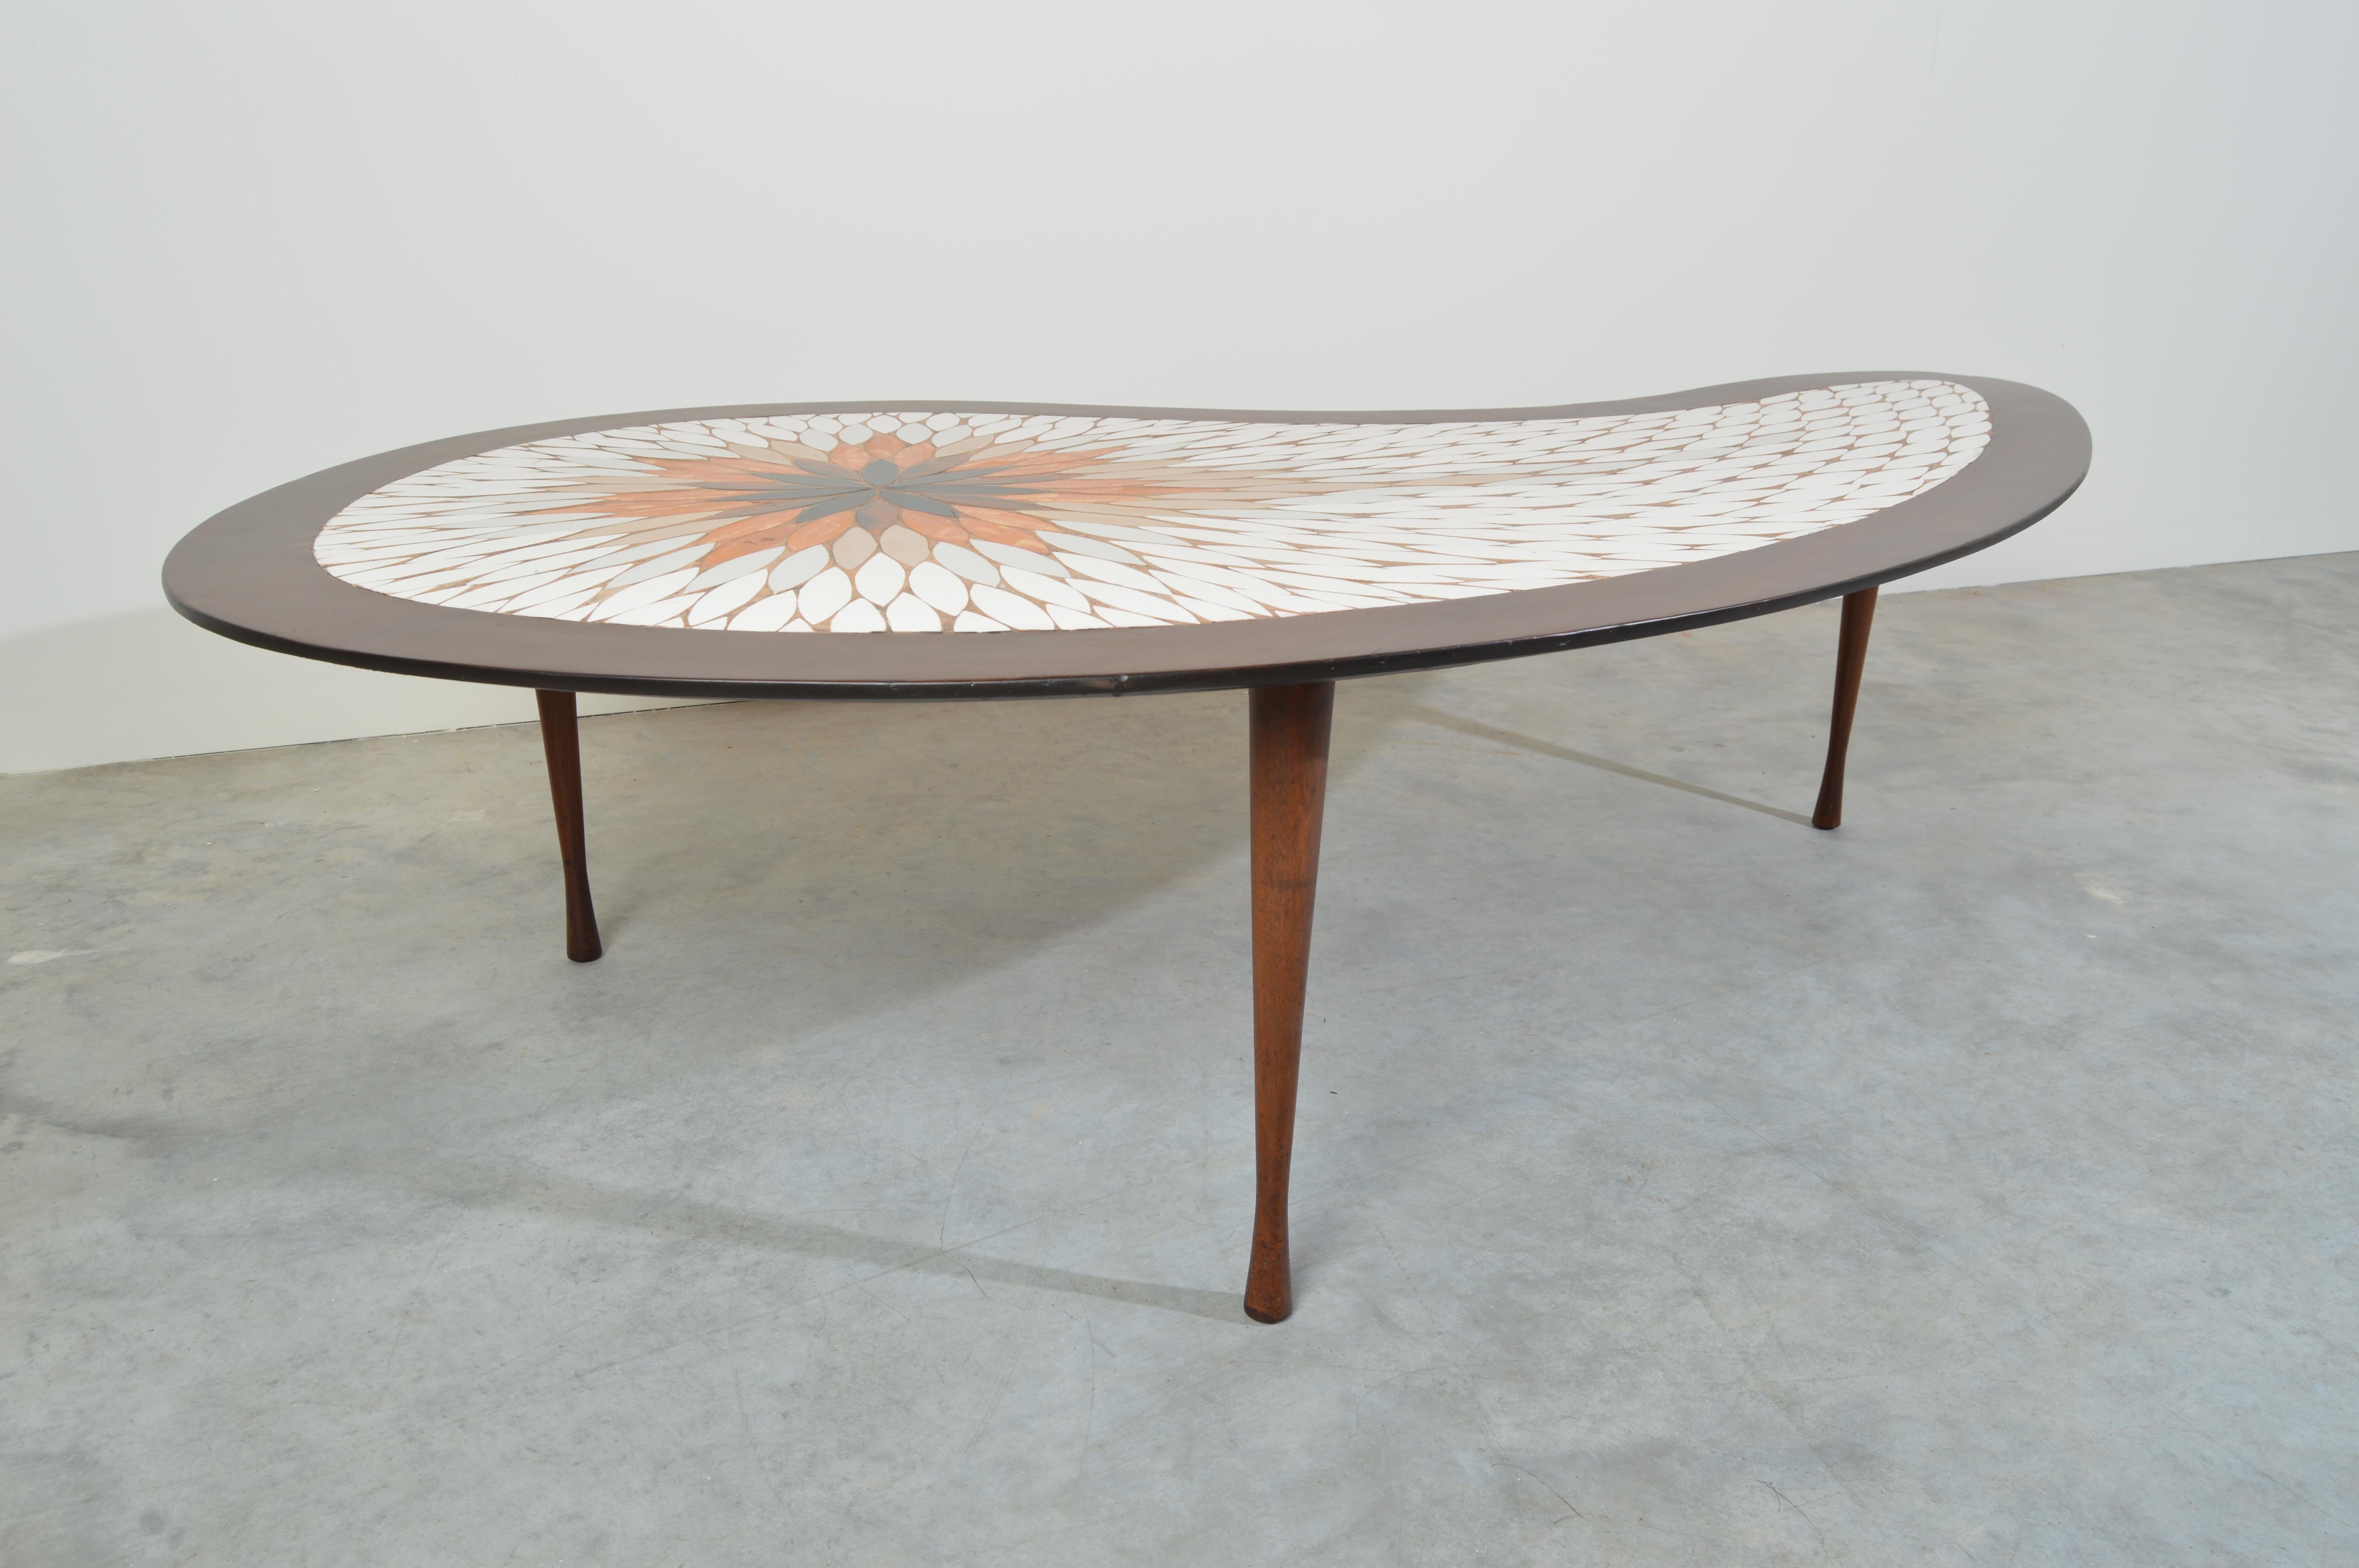 Midcentury Kidney Shaped Mosaic Coffee Table by Hohenberg Originals 1